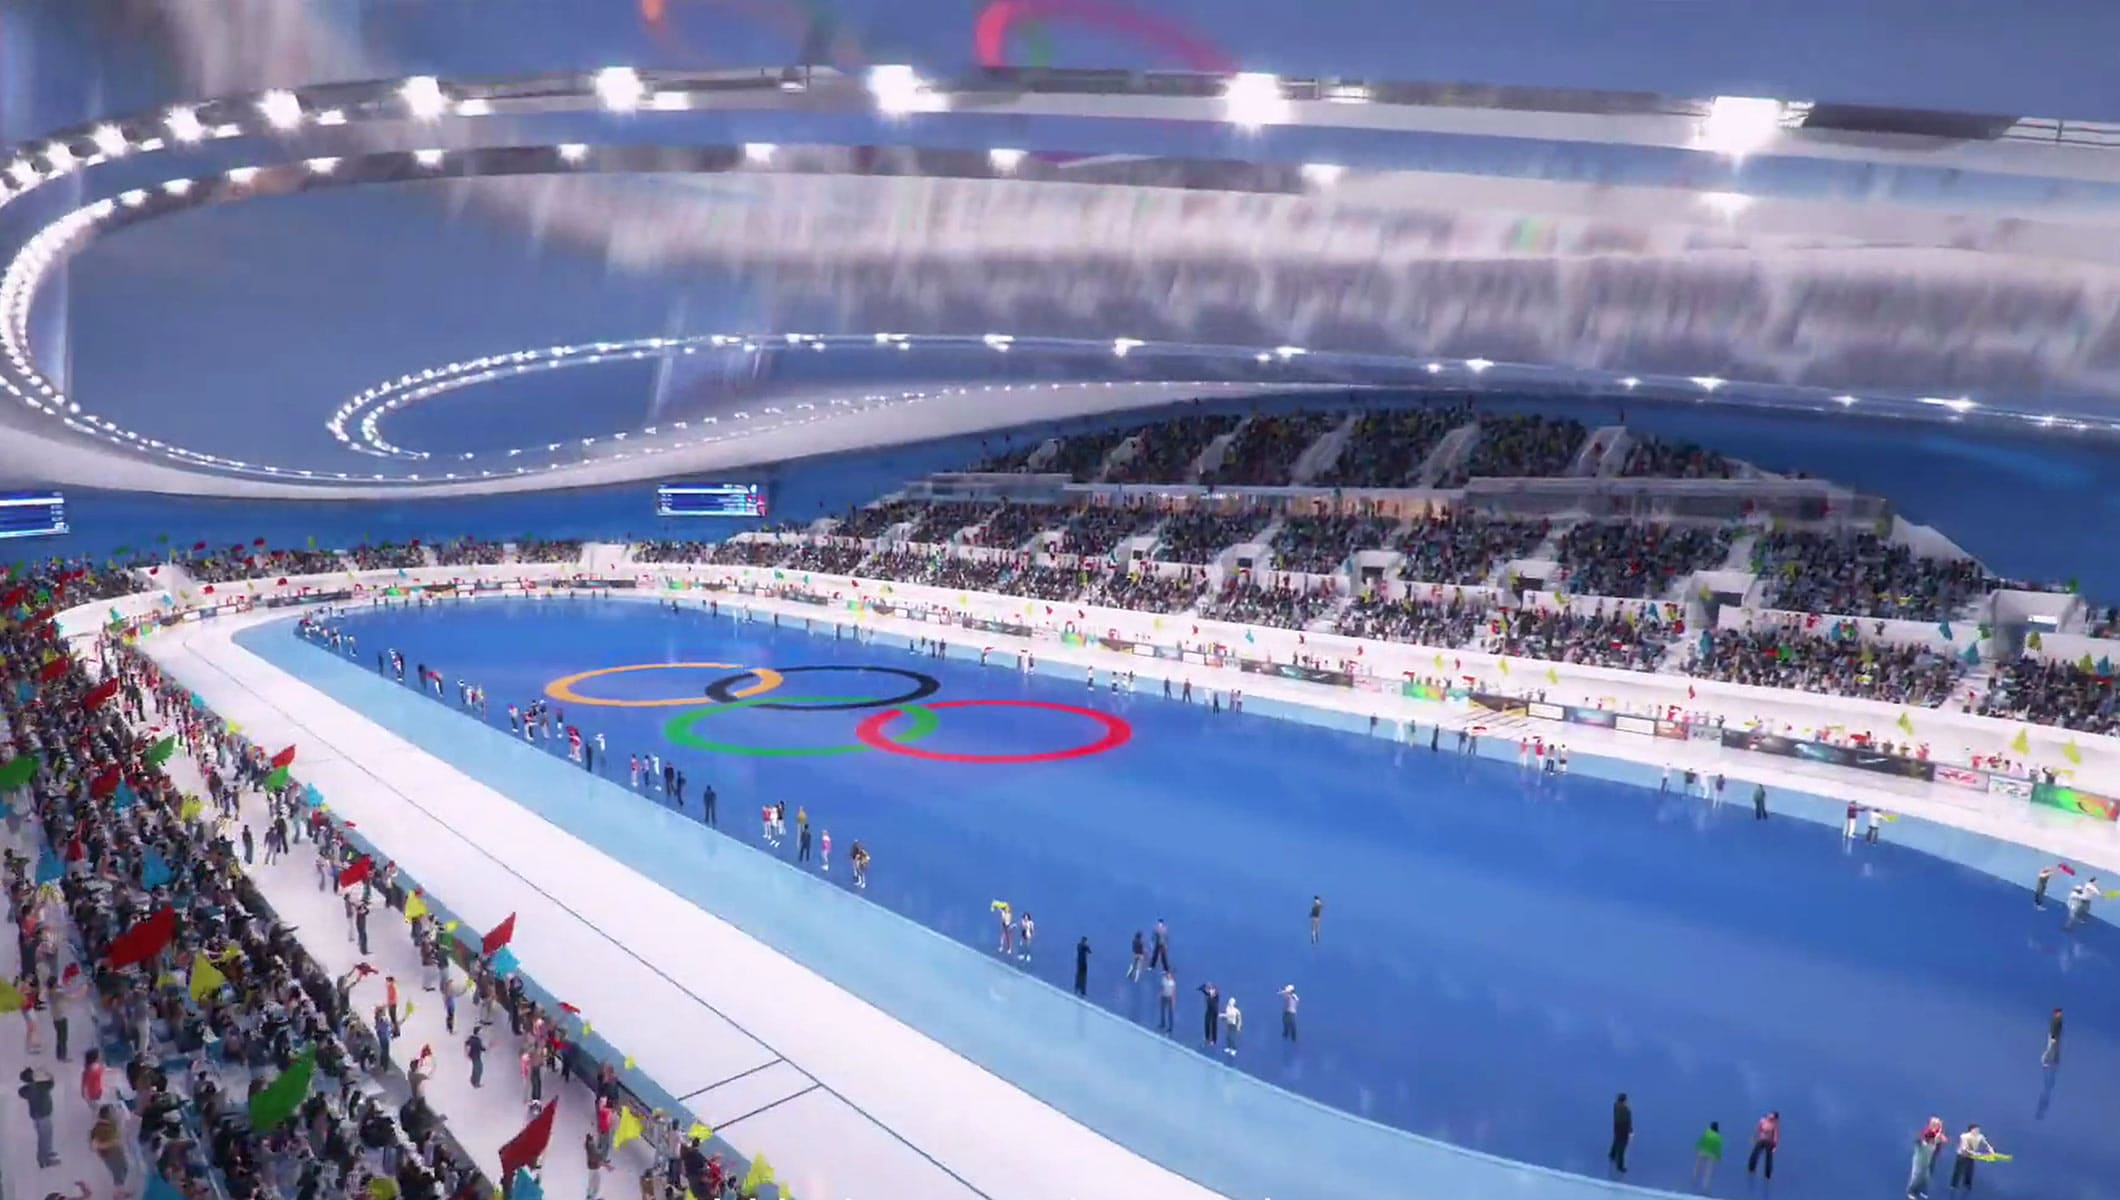 Beijing 2022 ice venue cooling system to reduce carbon footprint of